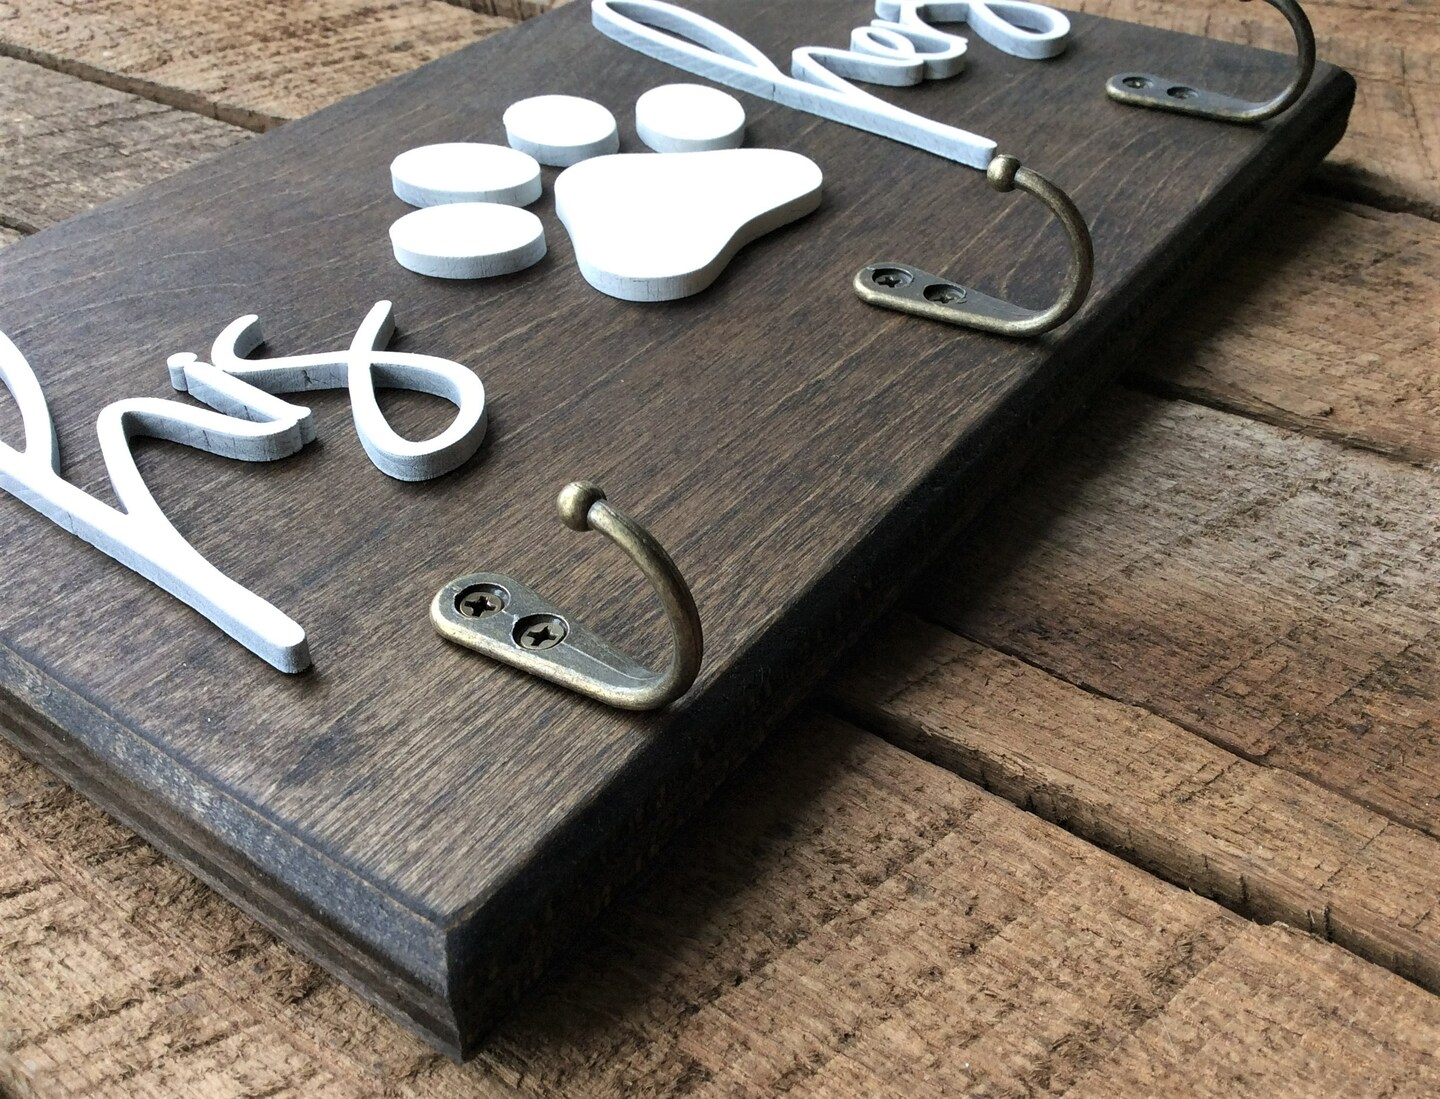 MTERSN Farmhouse Key Holder for Wall - Decorative Dog Leash Hanger Wall Mounted and Coat Rack with 5 Unique 3D Dog Claw Hooks - Dog Accessories